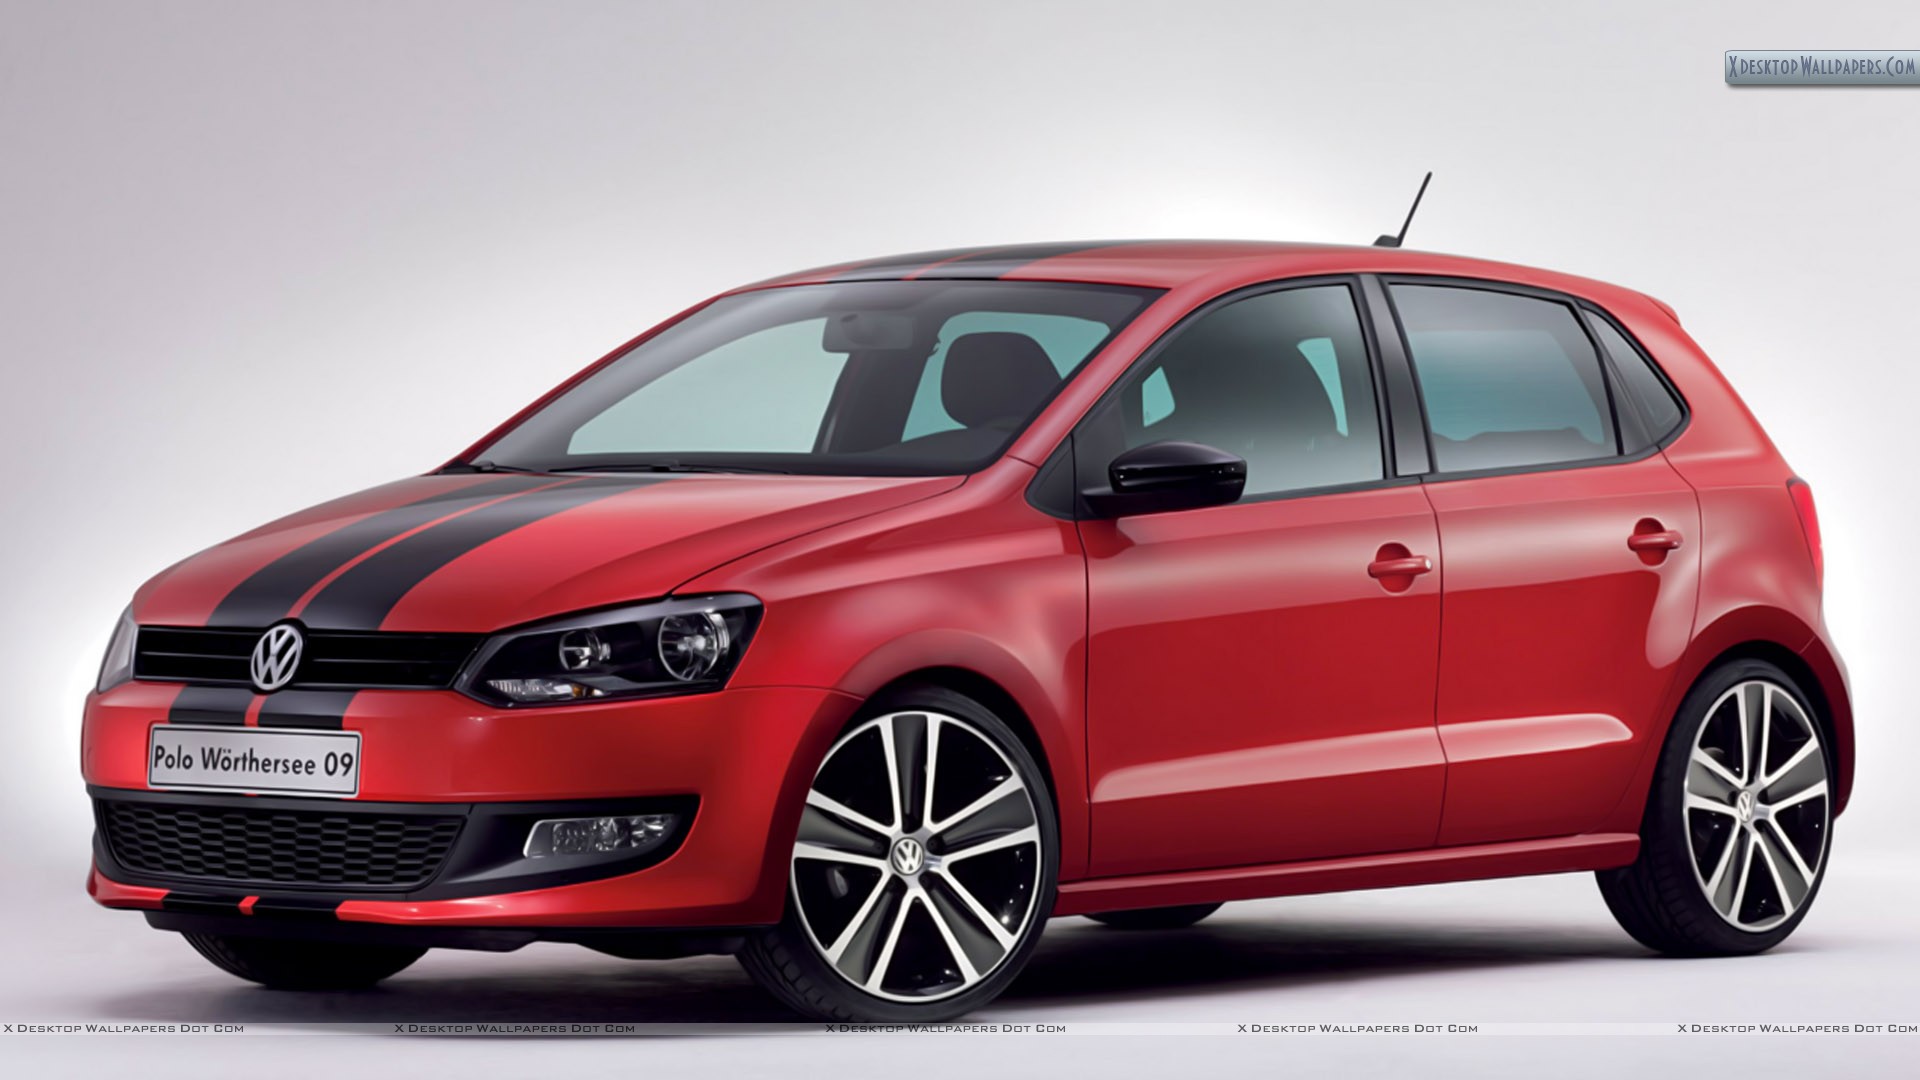 Polo Worthersee Concept Red Car Black Stripes Wallpaper